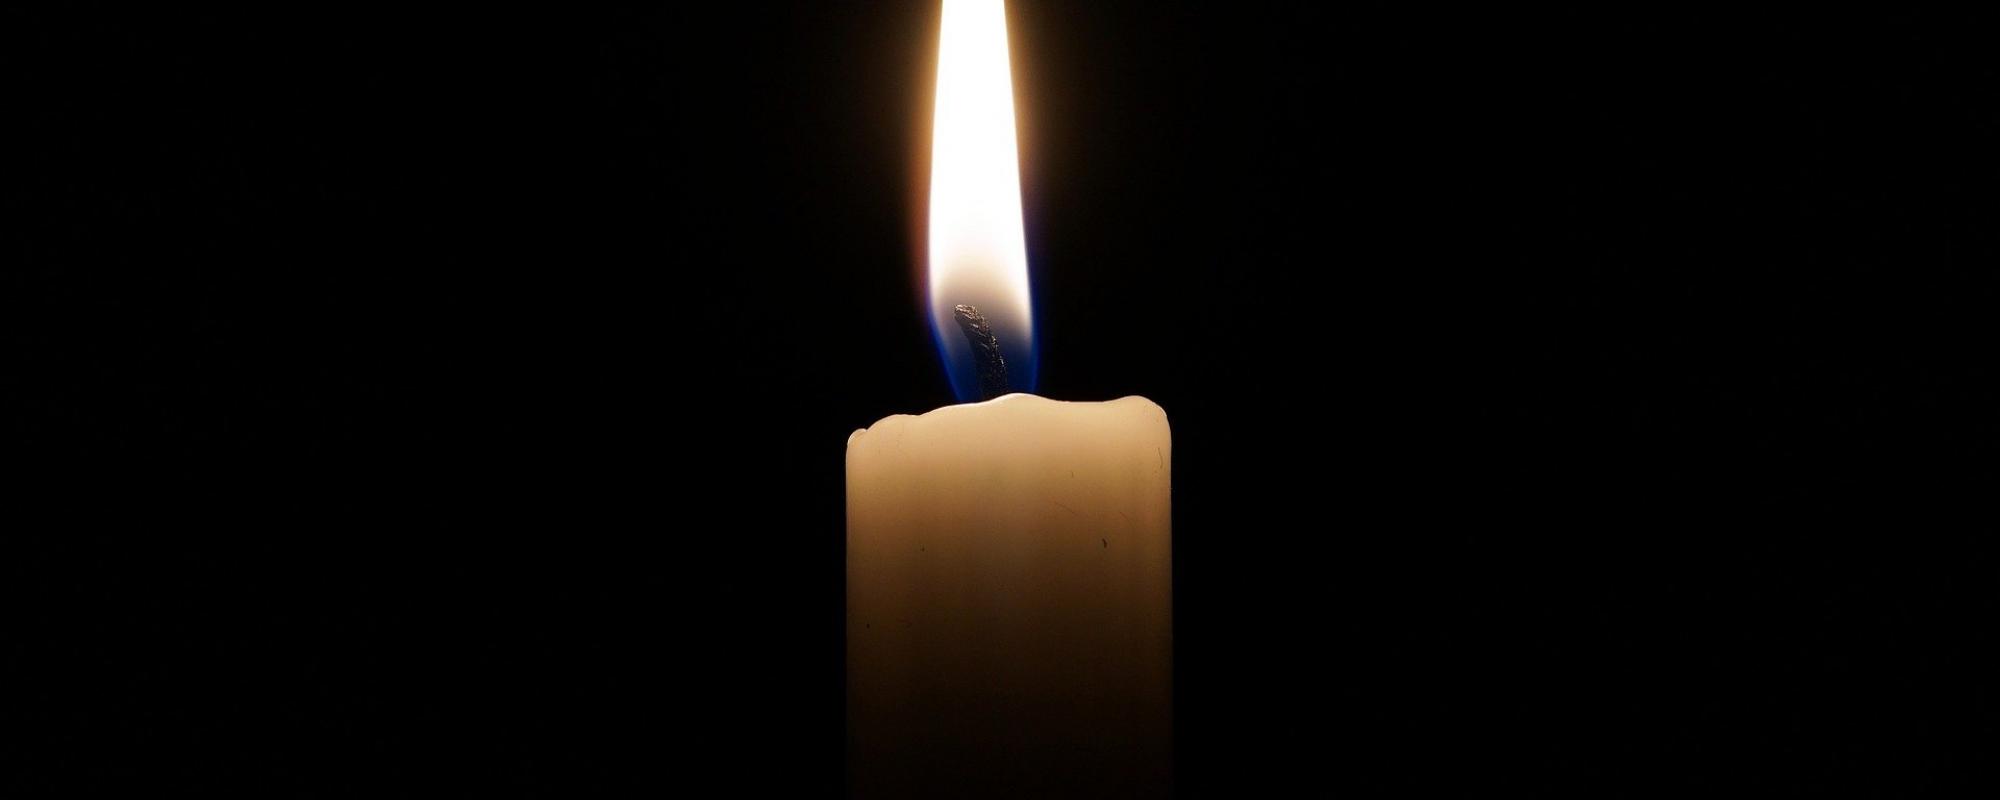 Dark background with a single lit candle